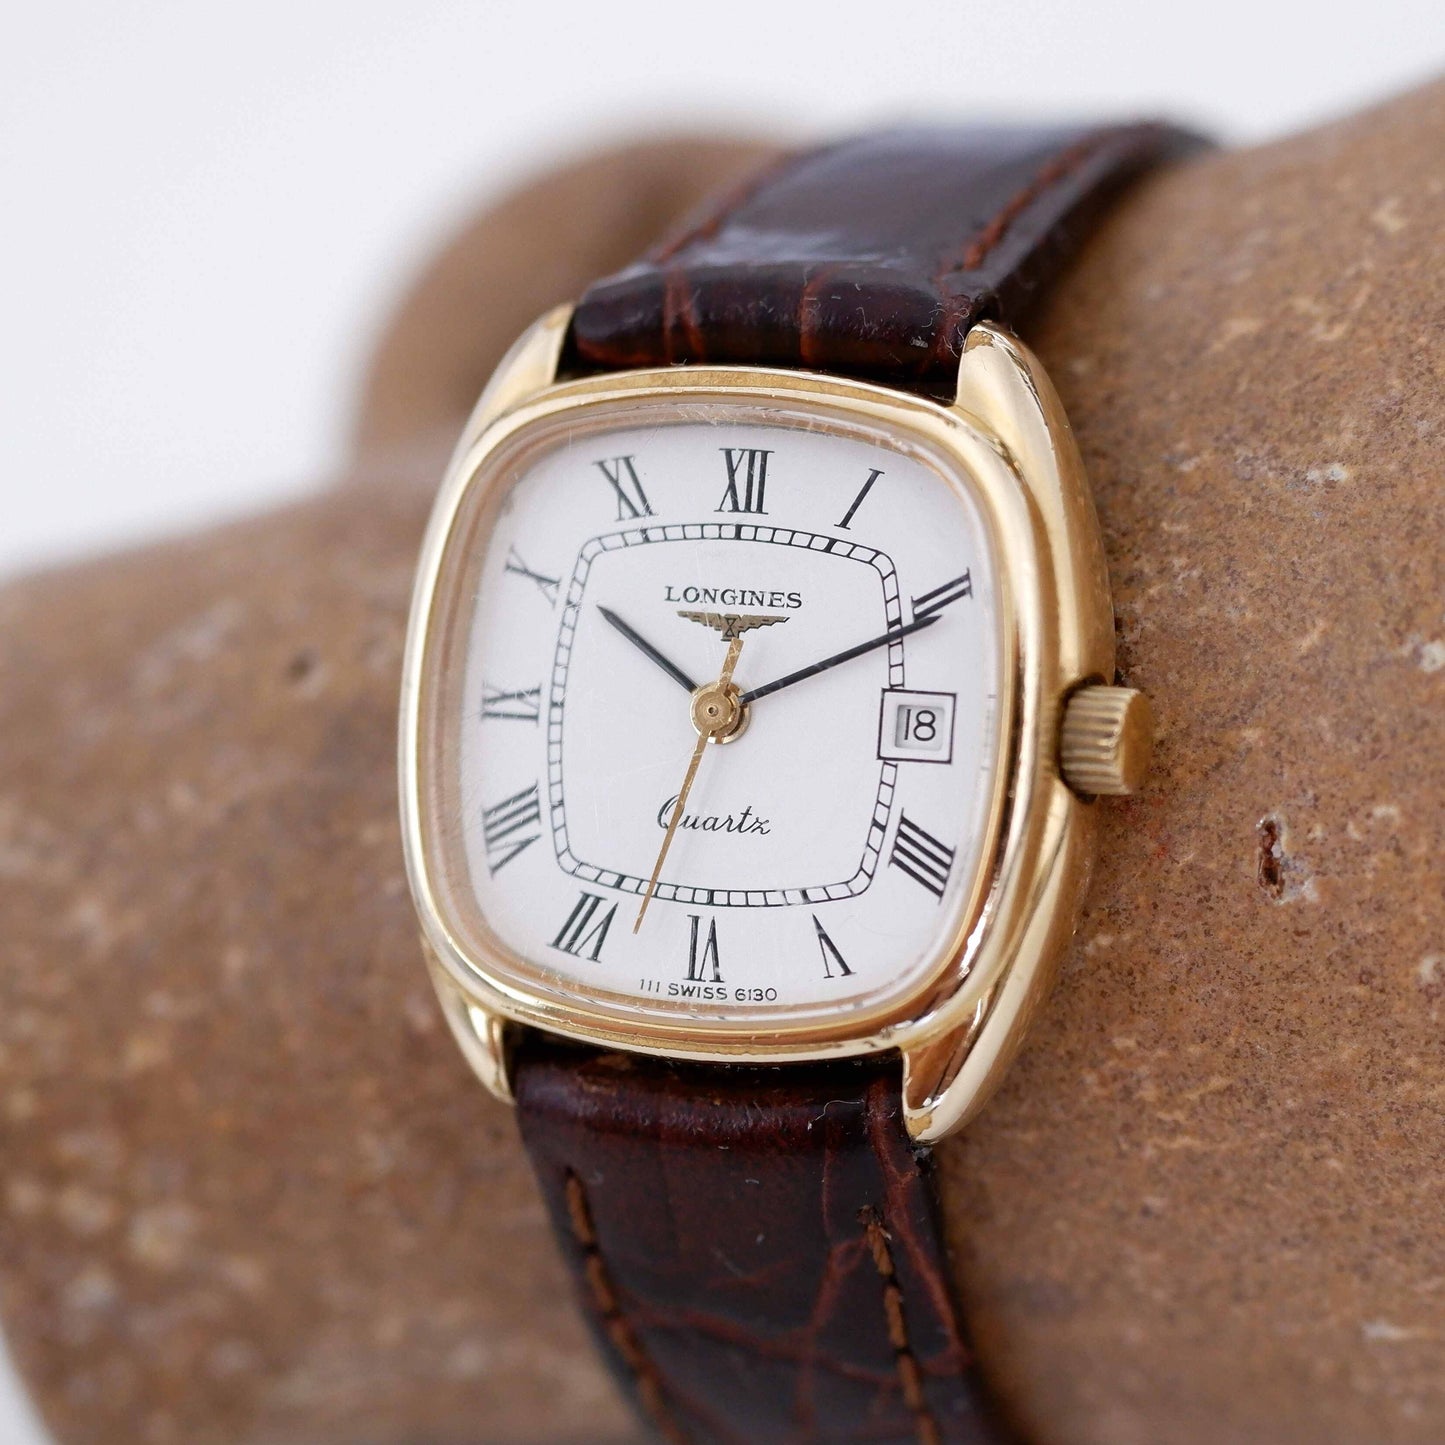 Longines Vintage Ladies Watch: 80s Golden, Rectangular with Roman Numerals | Slight Right Side